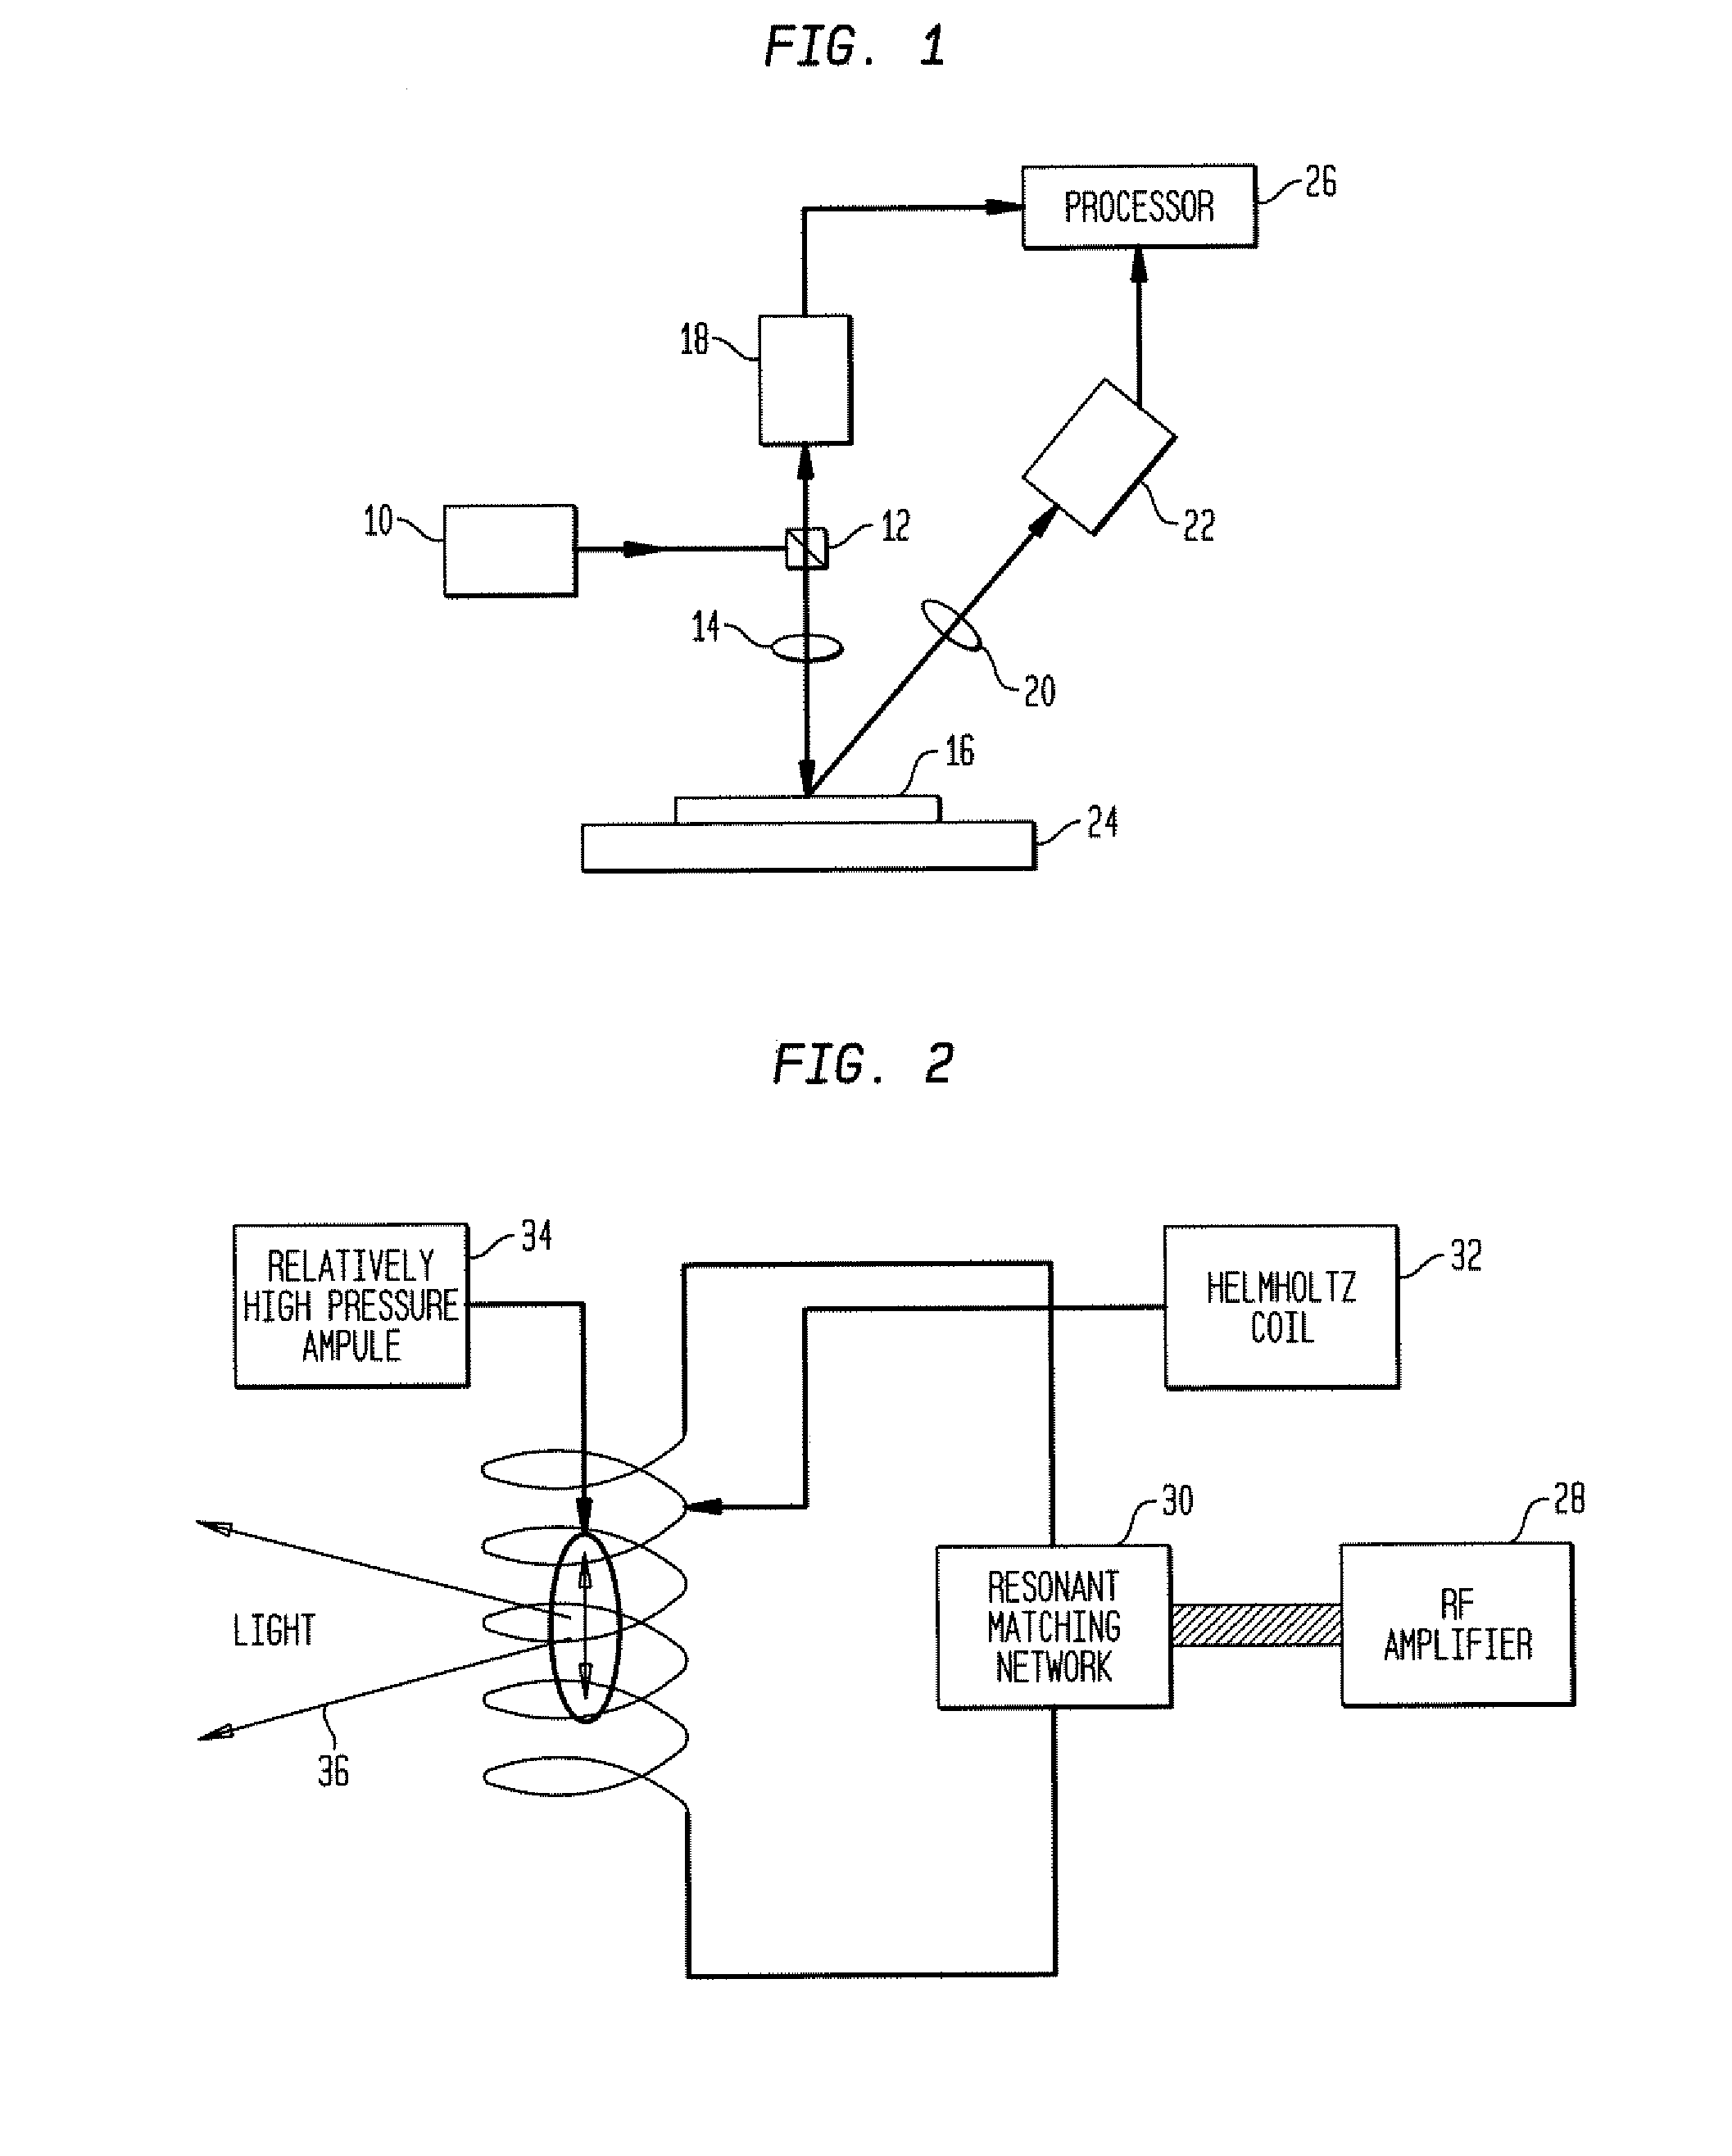 Methods and systems for providing illumination of a specimen for a process performed on the specimen